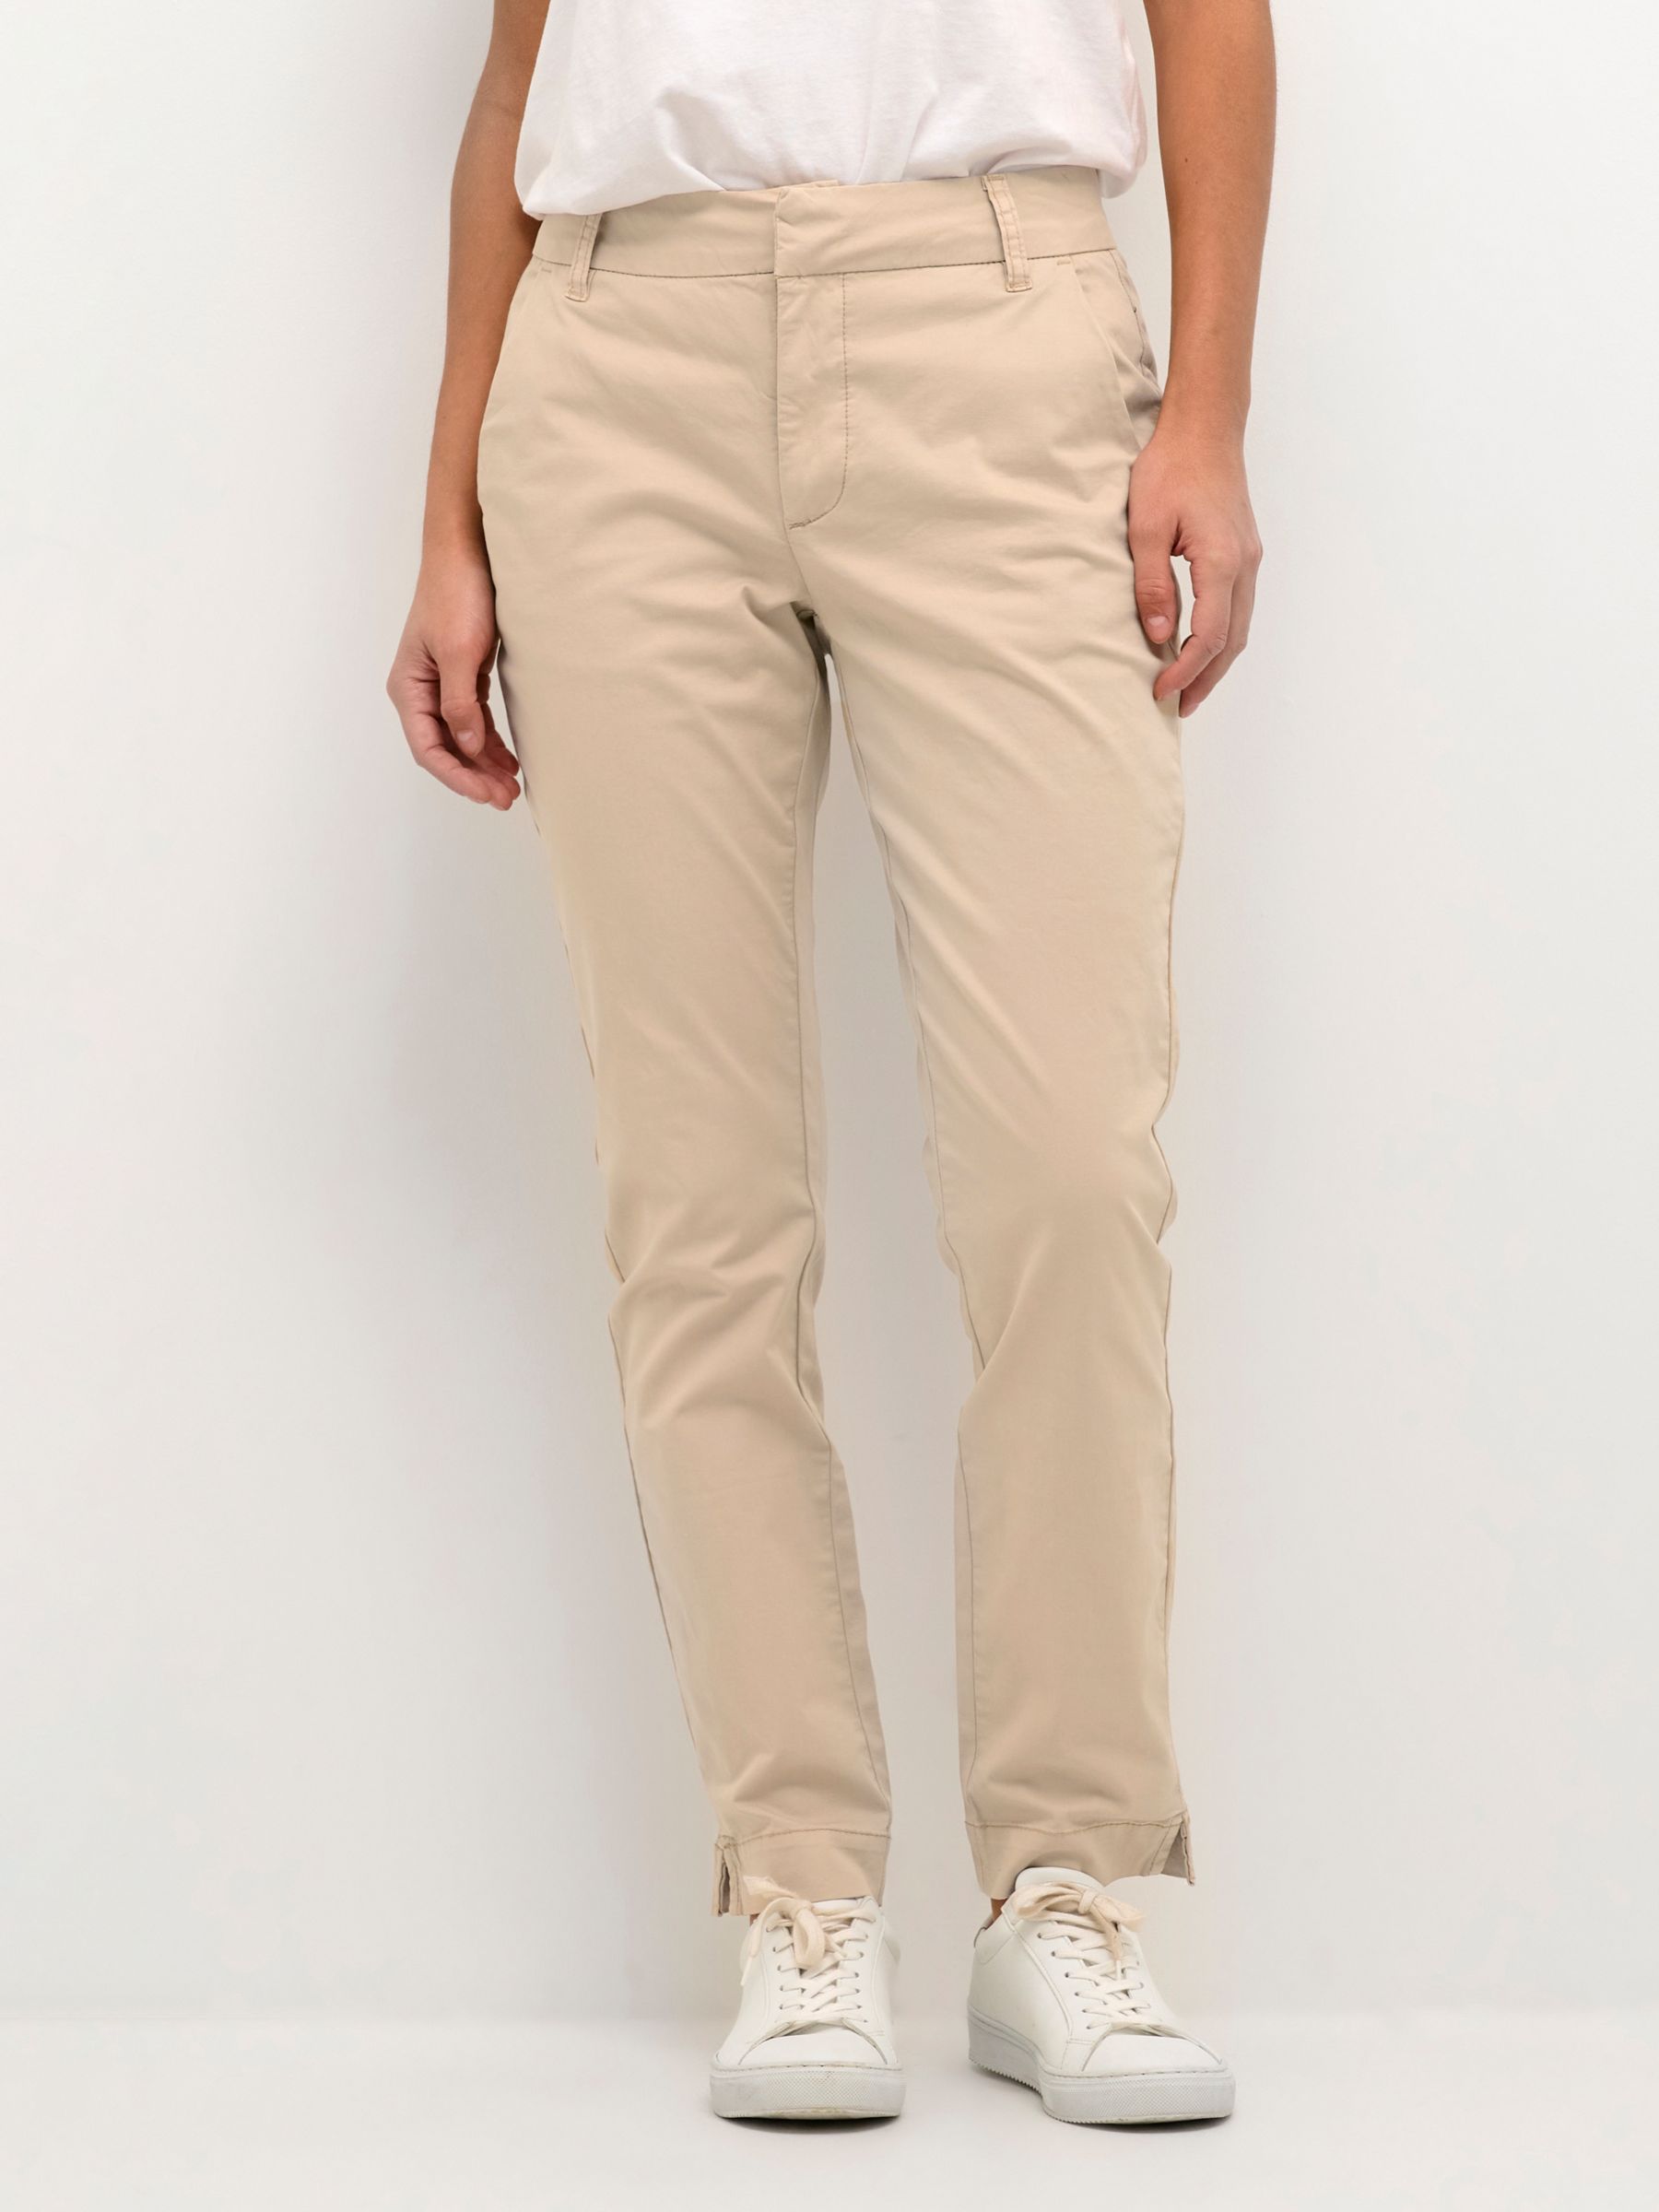 Women's Trousers For Travelling | John Lewis & Partners